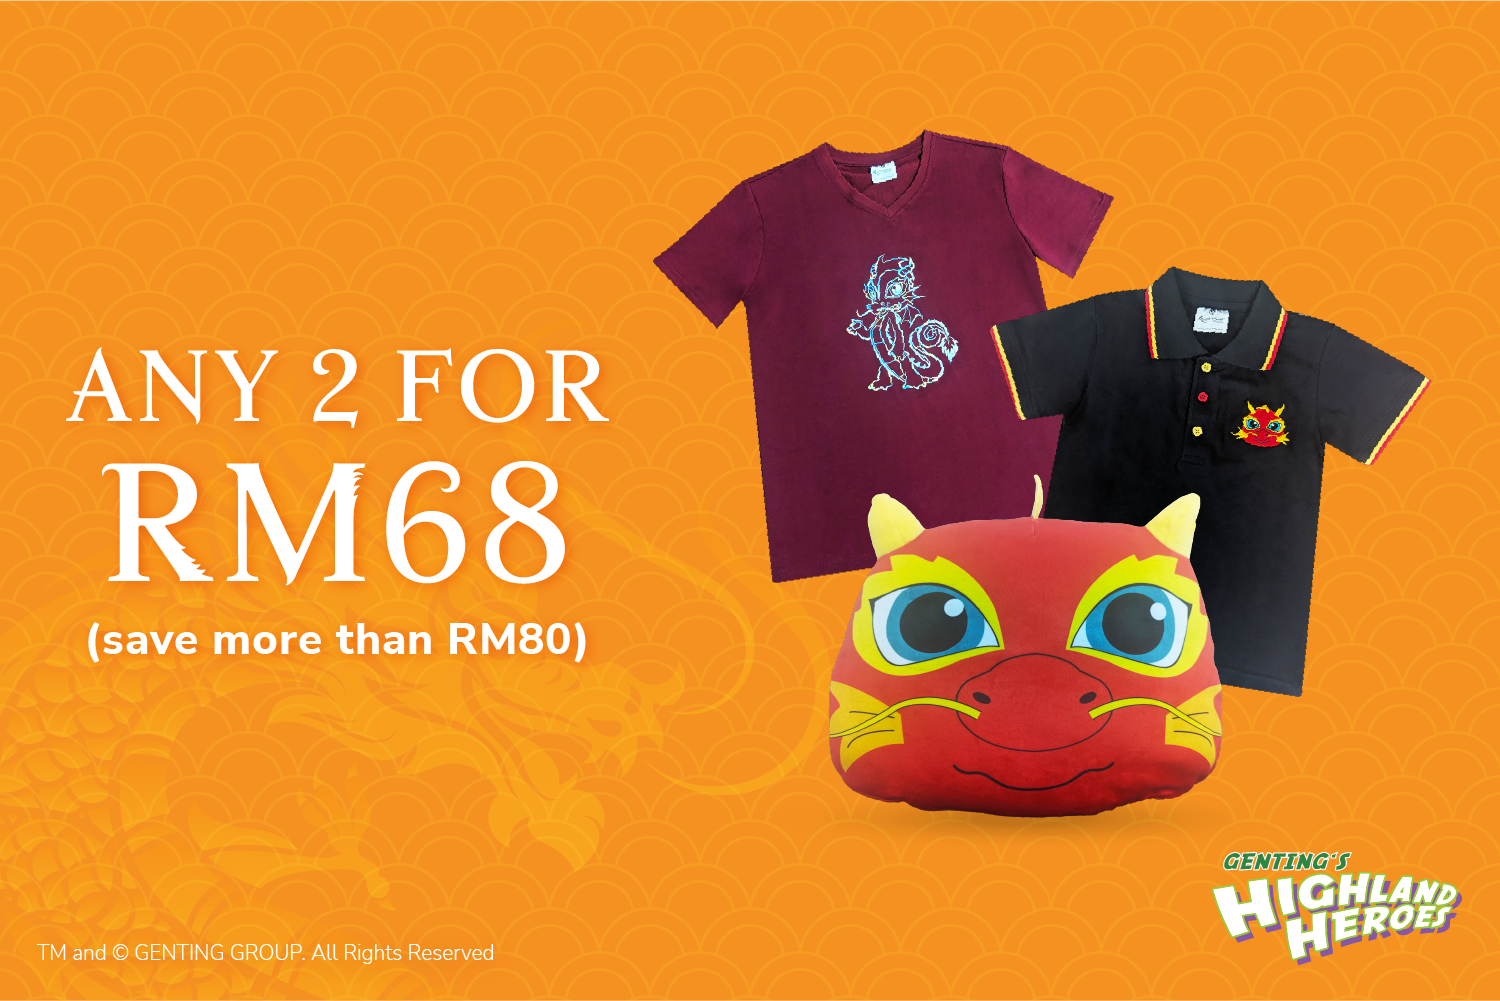 Any 2 for RM68 (save up to RM80):